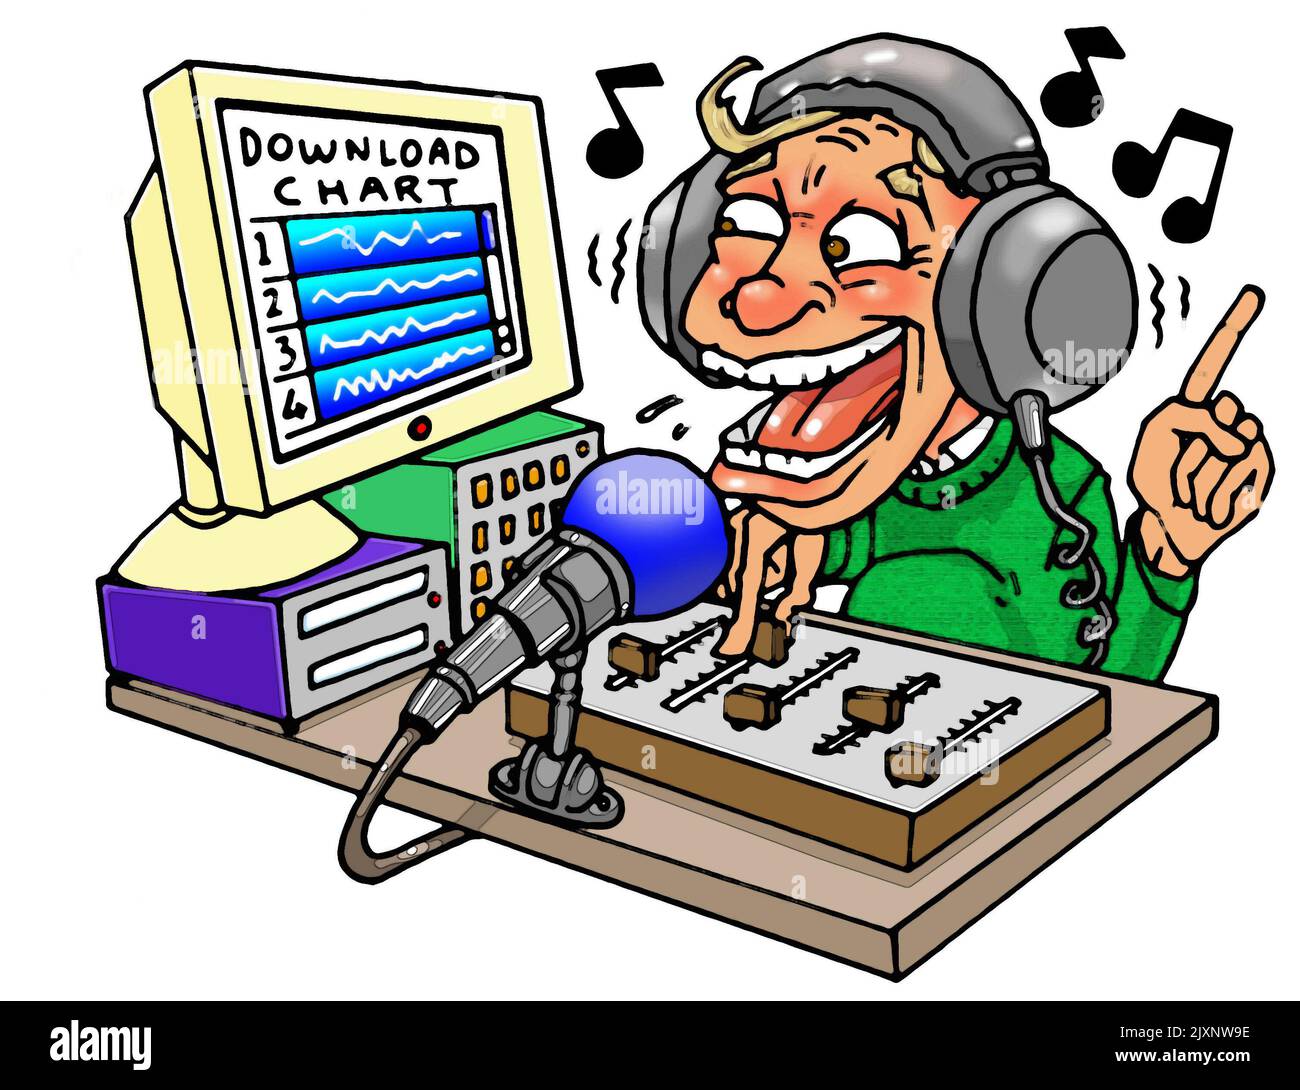 Cartoon, art, illustration of a disc jockey (DJ) sitting at a mixing desk, playing a selection of hits from the top of the pop music download charts. Stock Photo